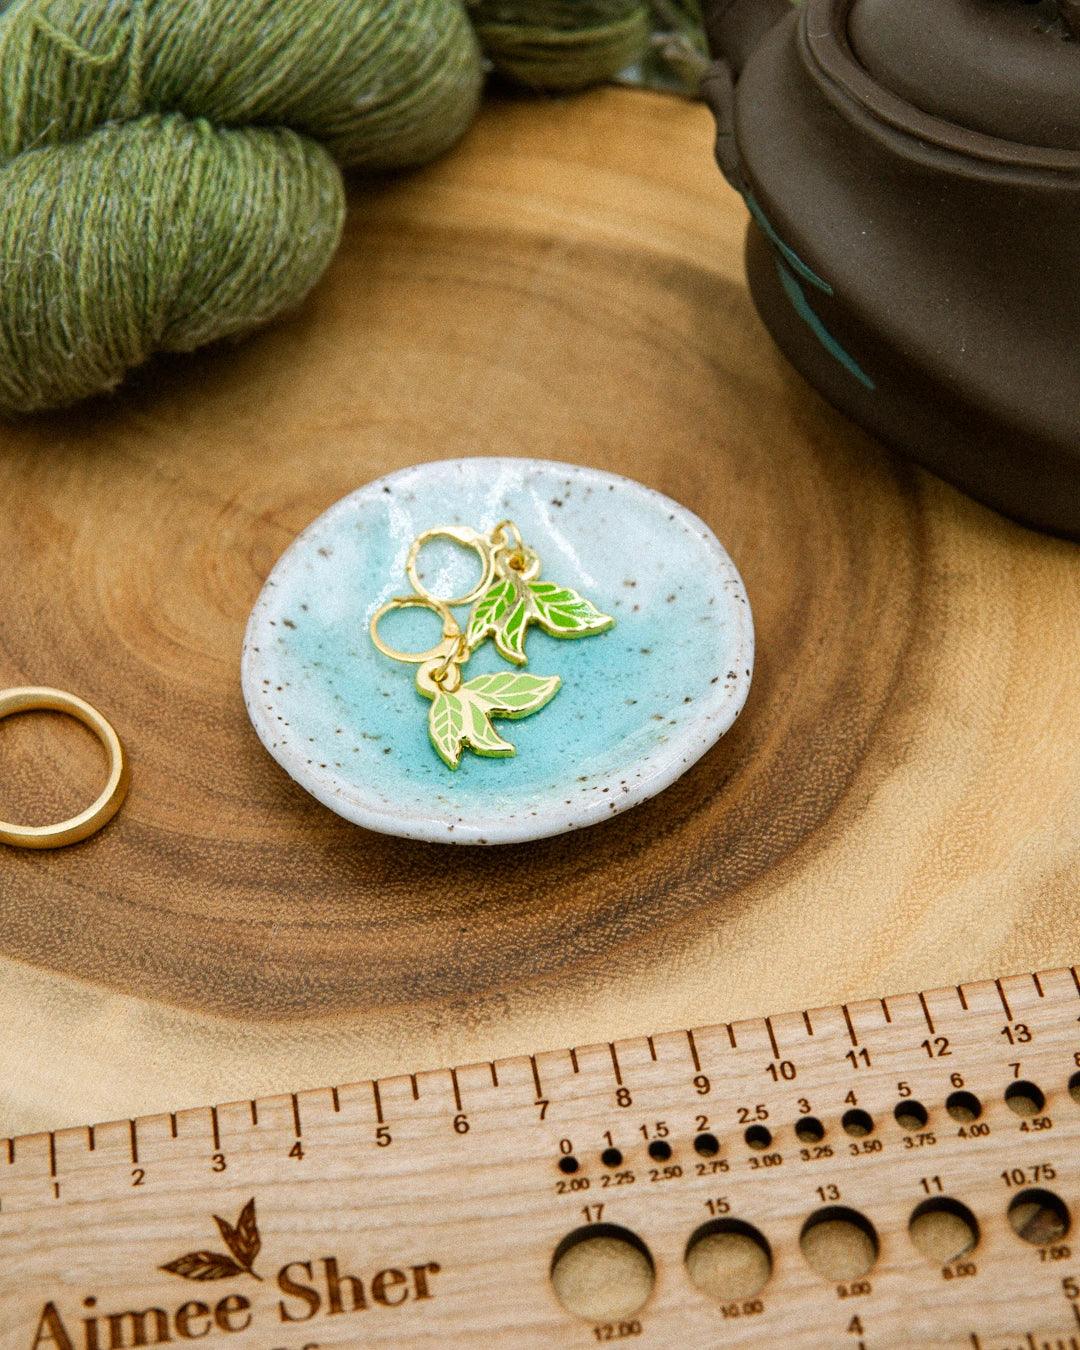 Tea Leaves Stitch Marker - Aimee Sher Makes